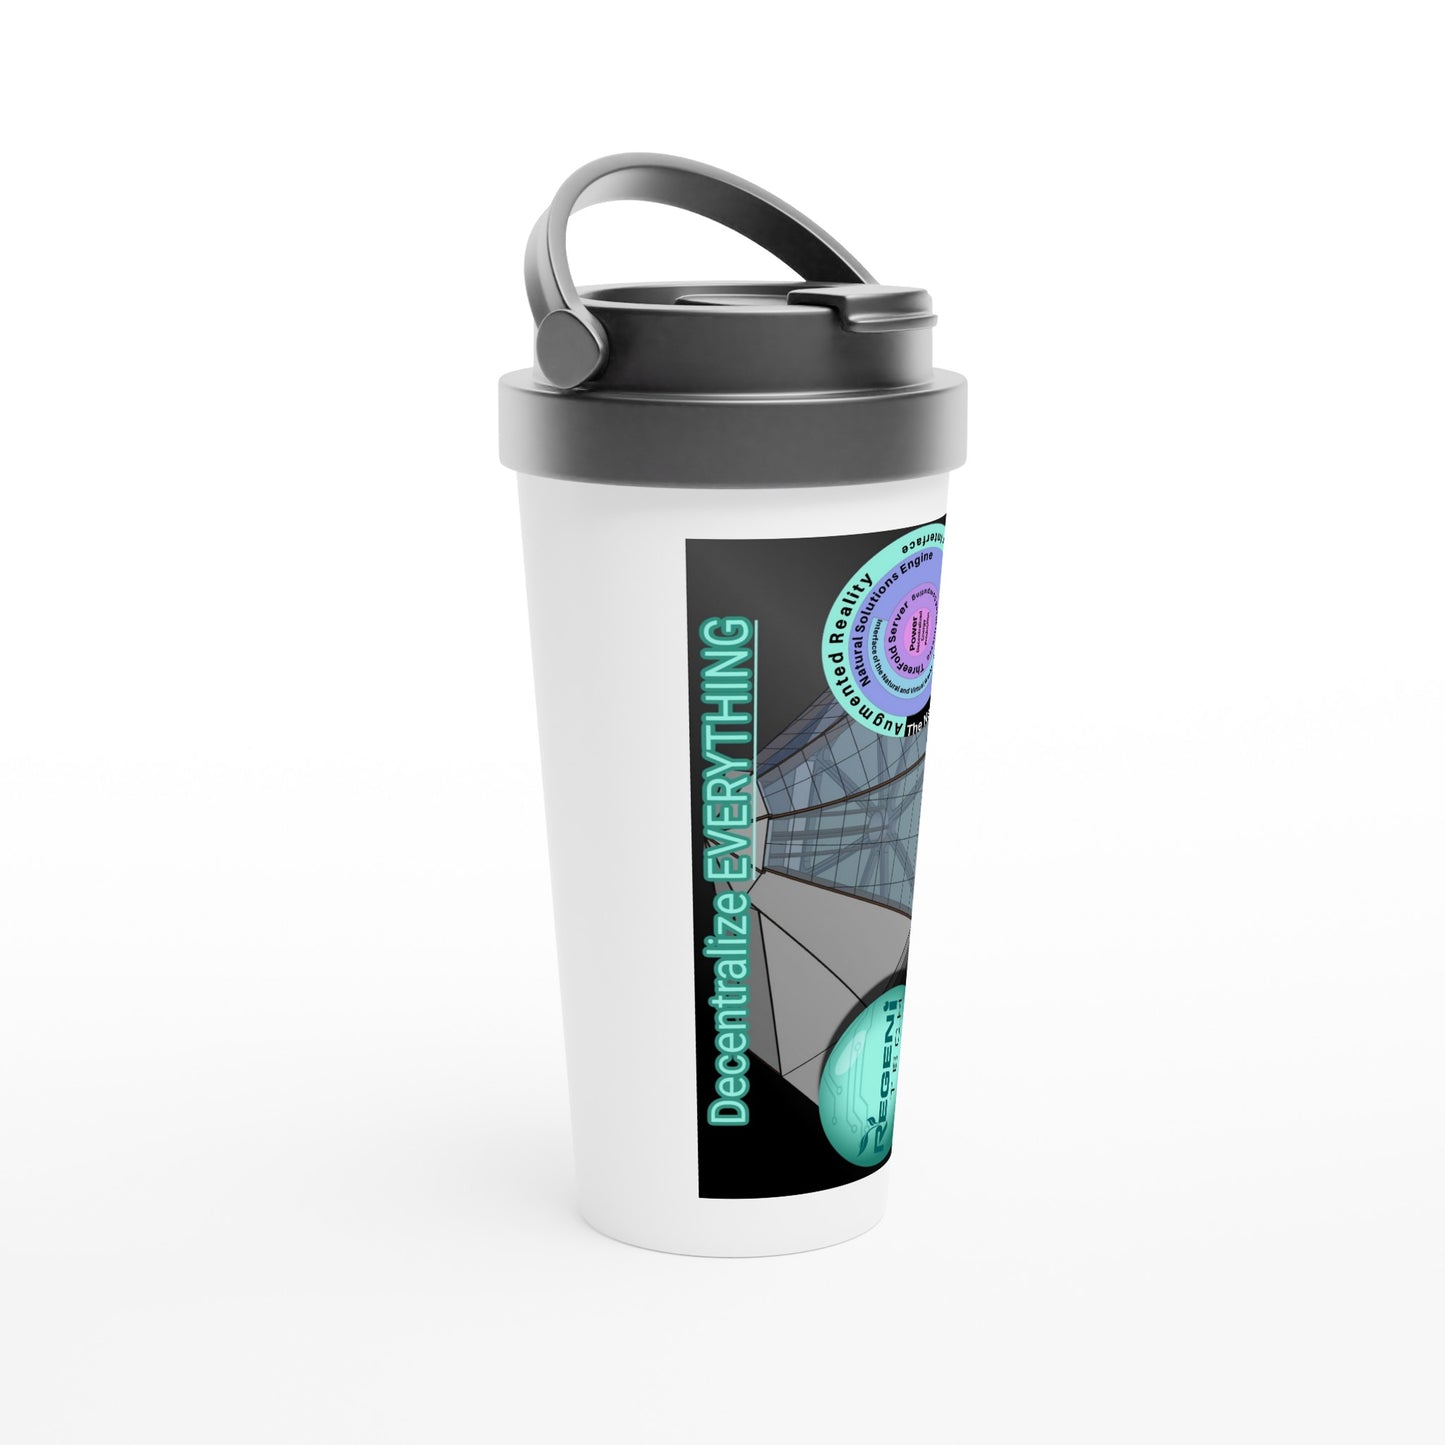 Decentralize EVERYTHING  White 15oz Stainless Steel Travel Mug